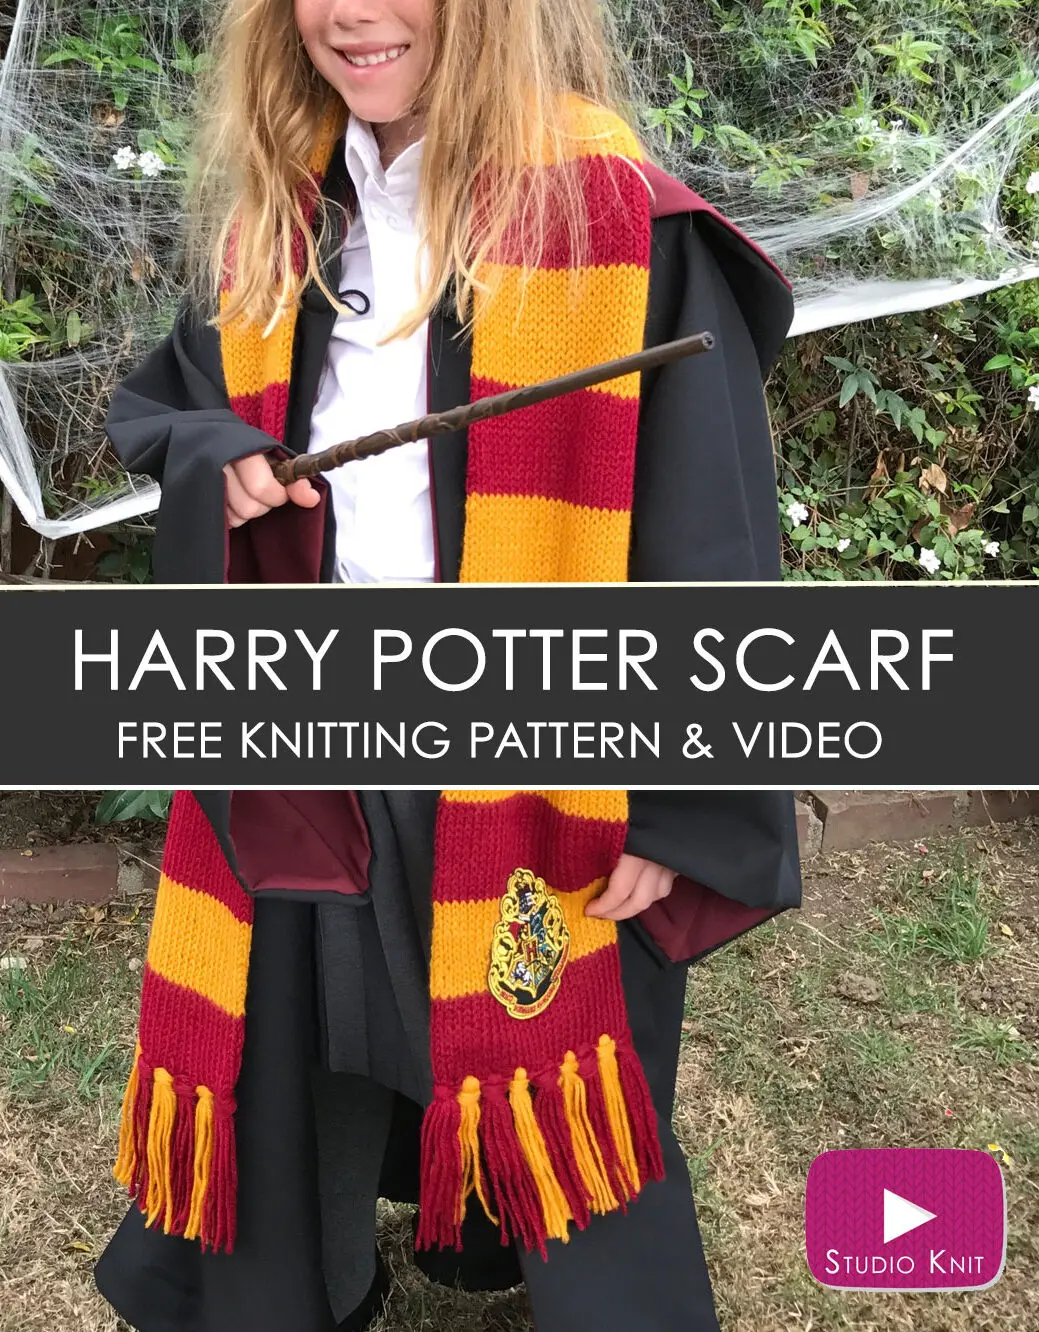 How to Knit a Harry Potter Gryffindor Scarf with Studio Knit | Free Knitting Pattern